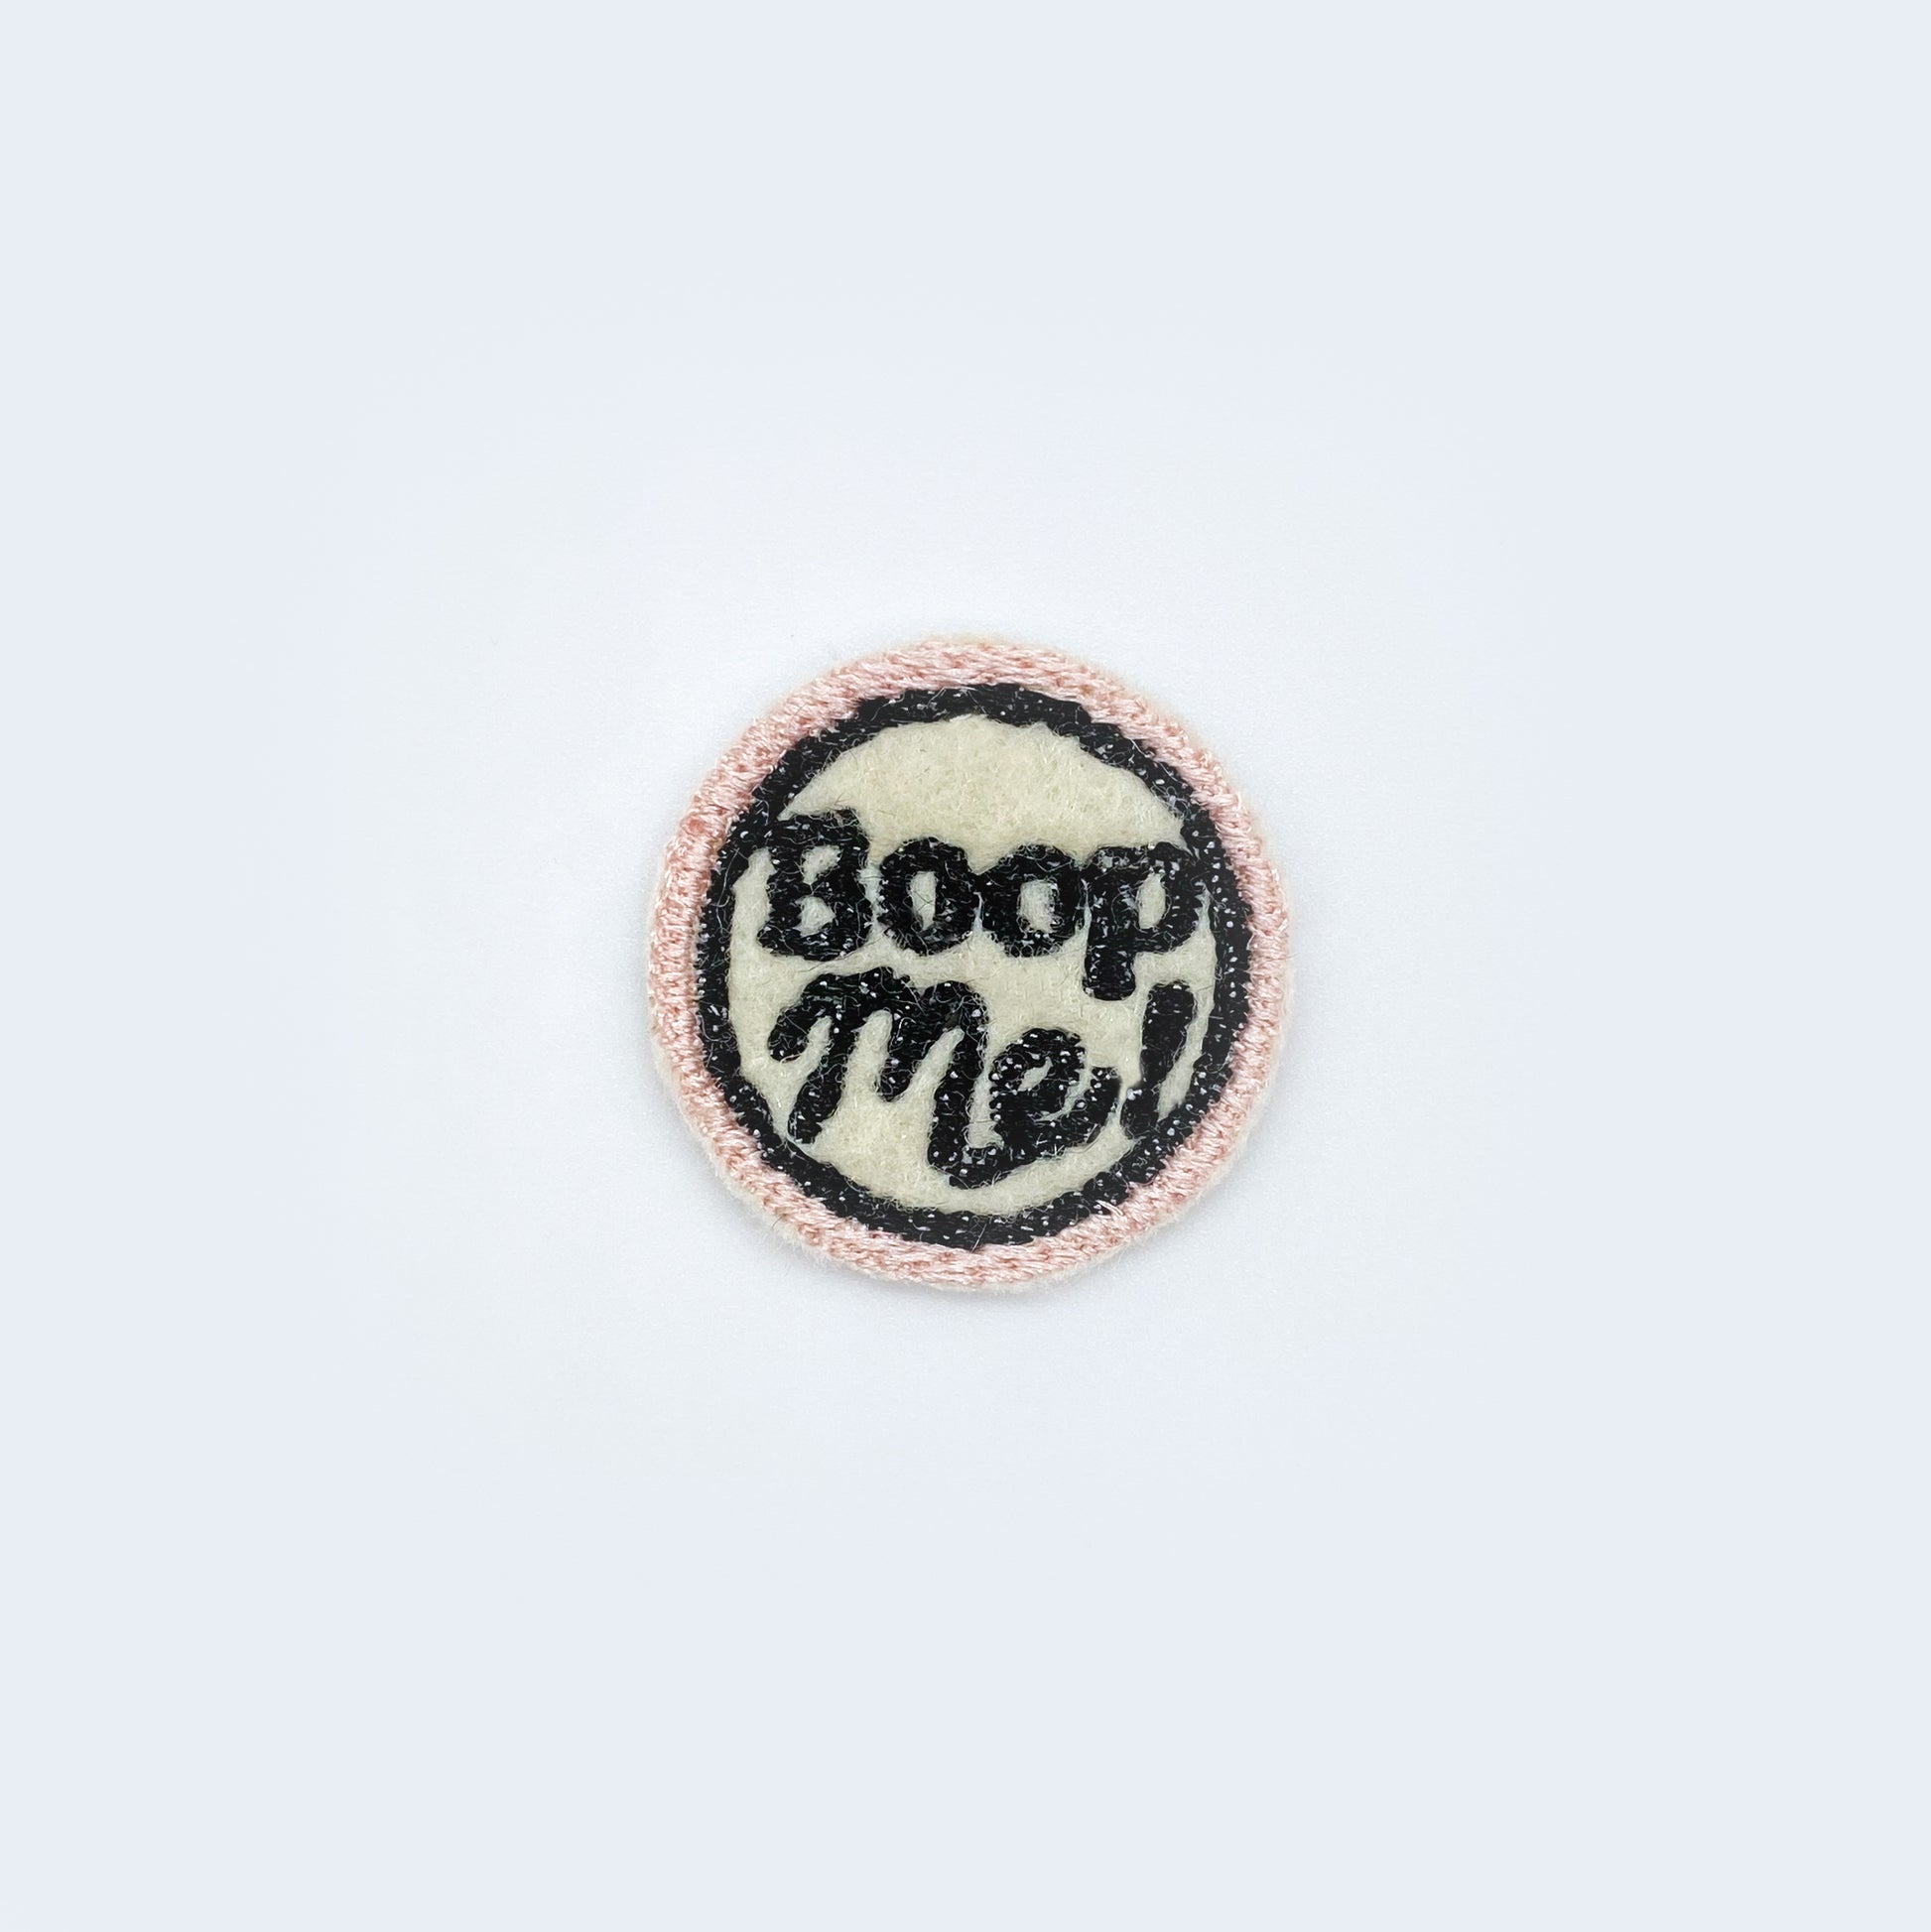 Boop Me Patch for dog cat pet bow tie BIG PUPPA  pet apparel with custom Bop Pop Pets